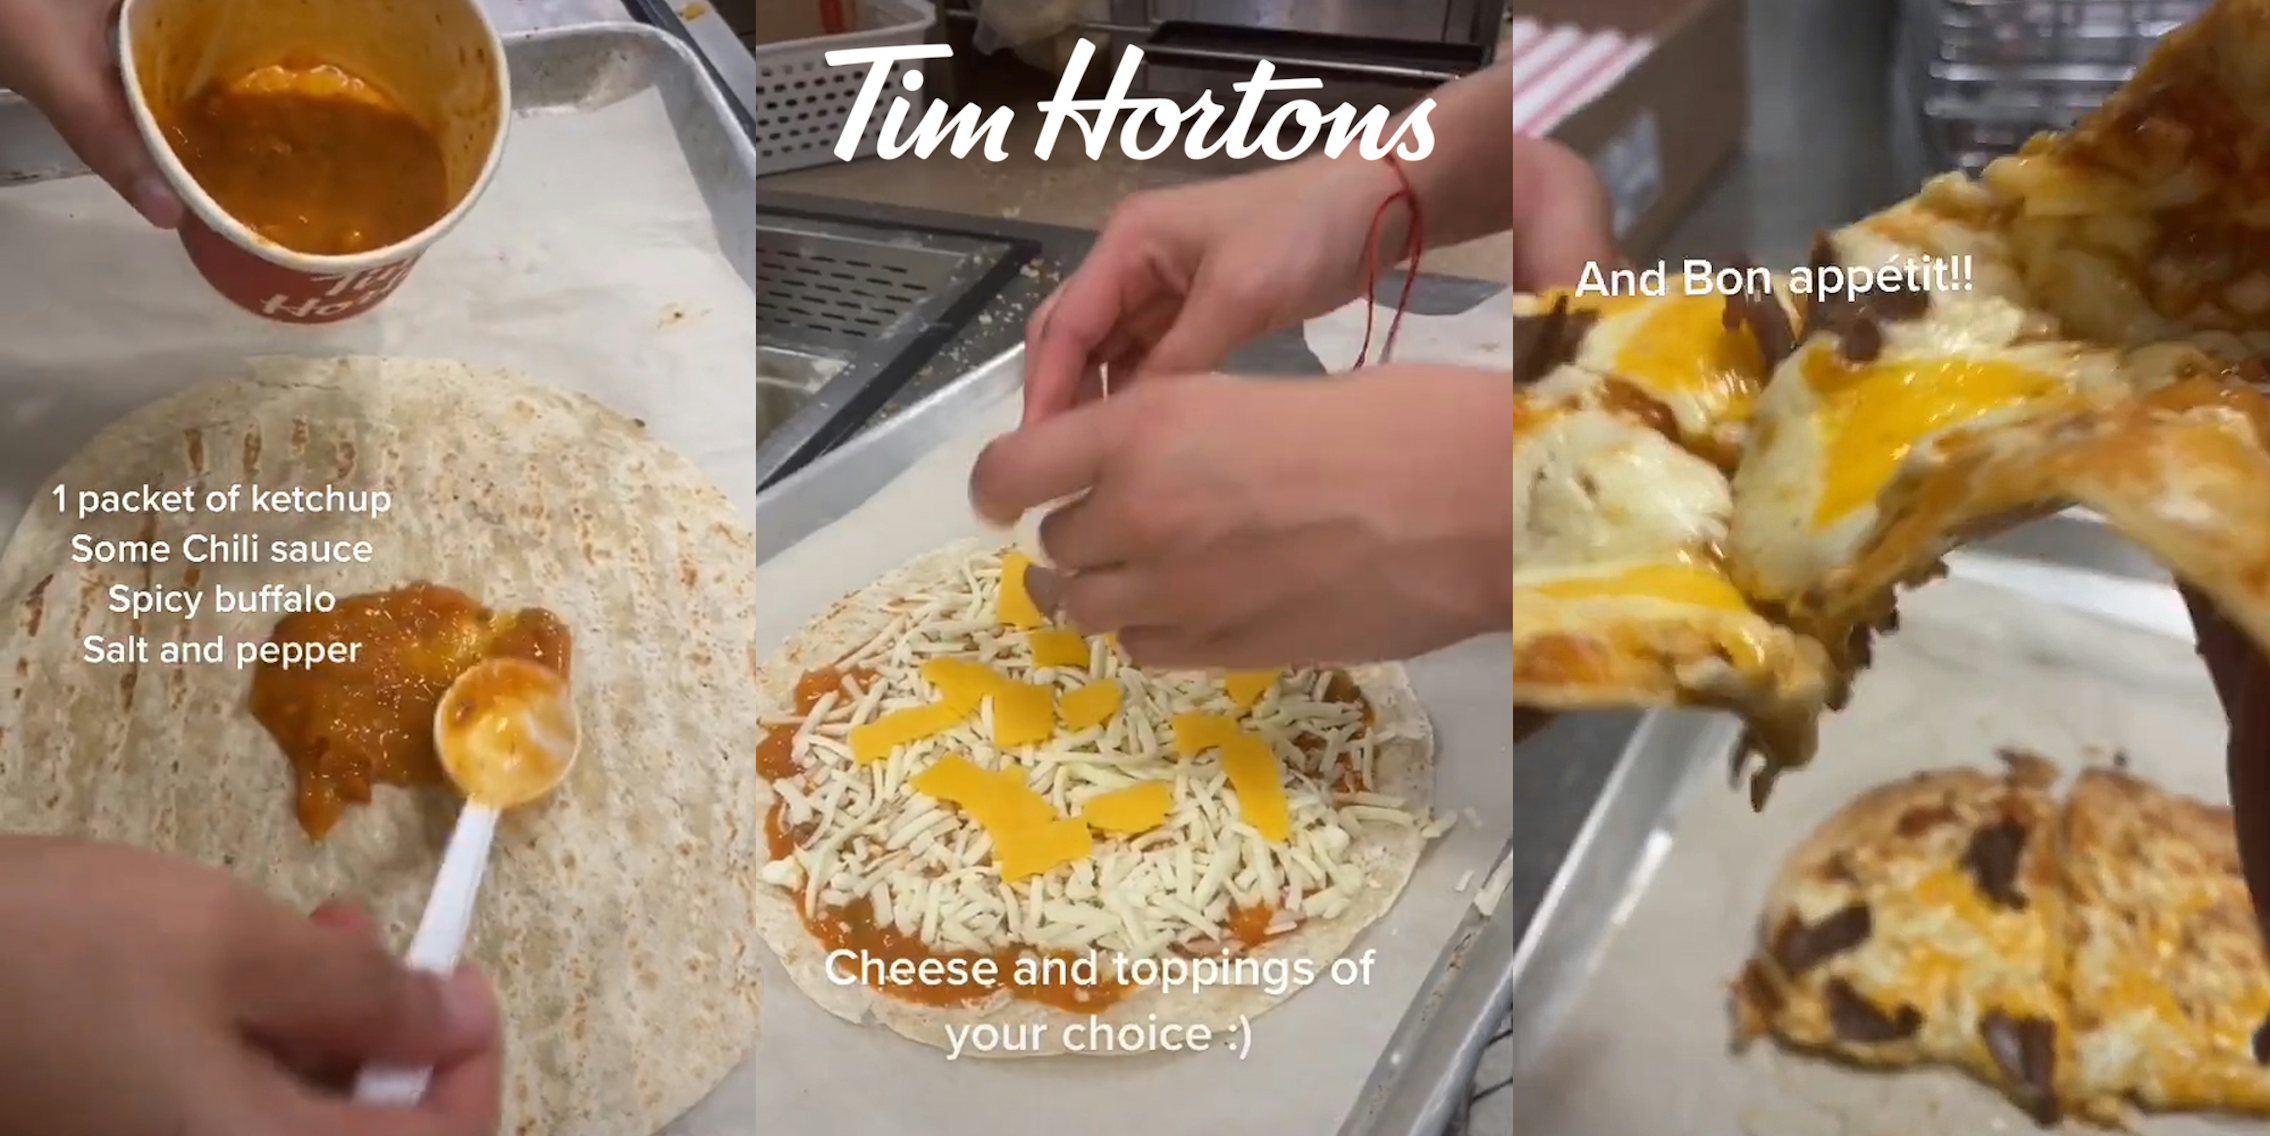 Tim Hortons Is Testing Flatbread Pizzas In Canada & Here's What We